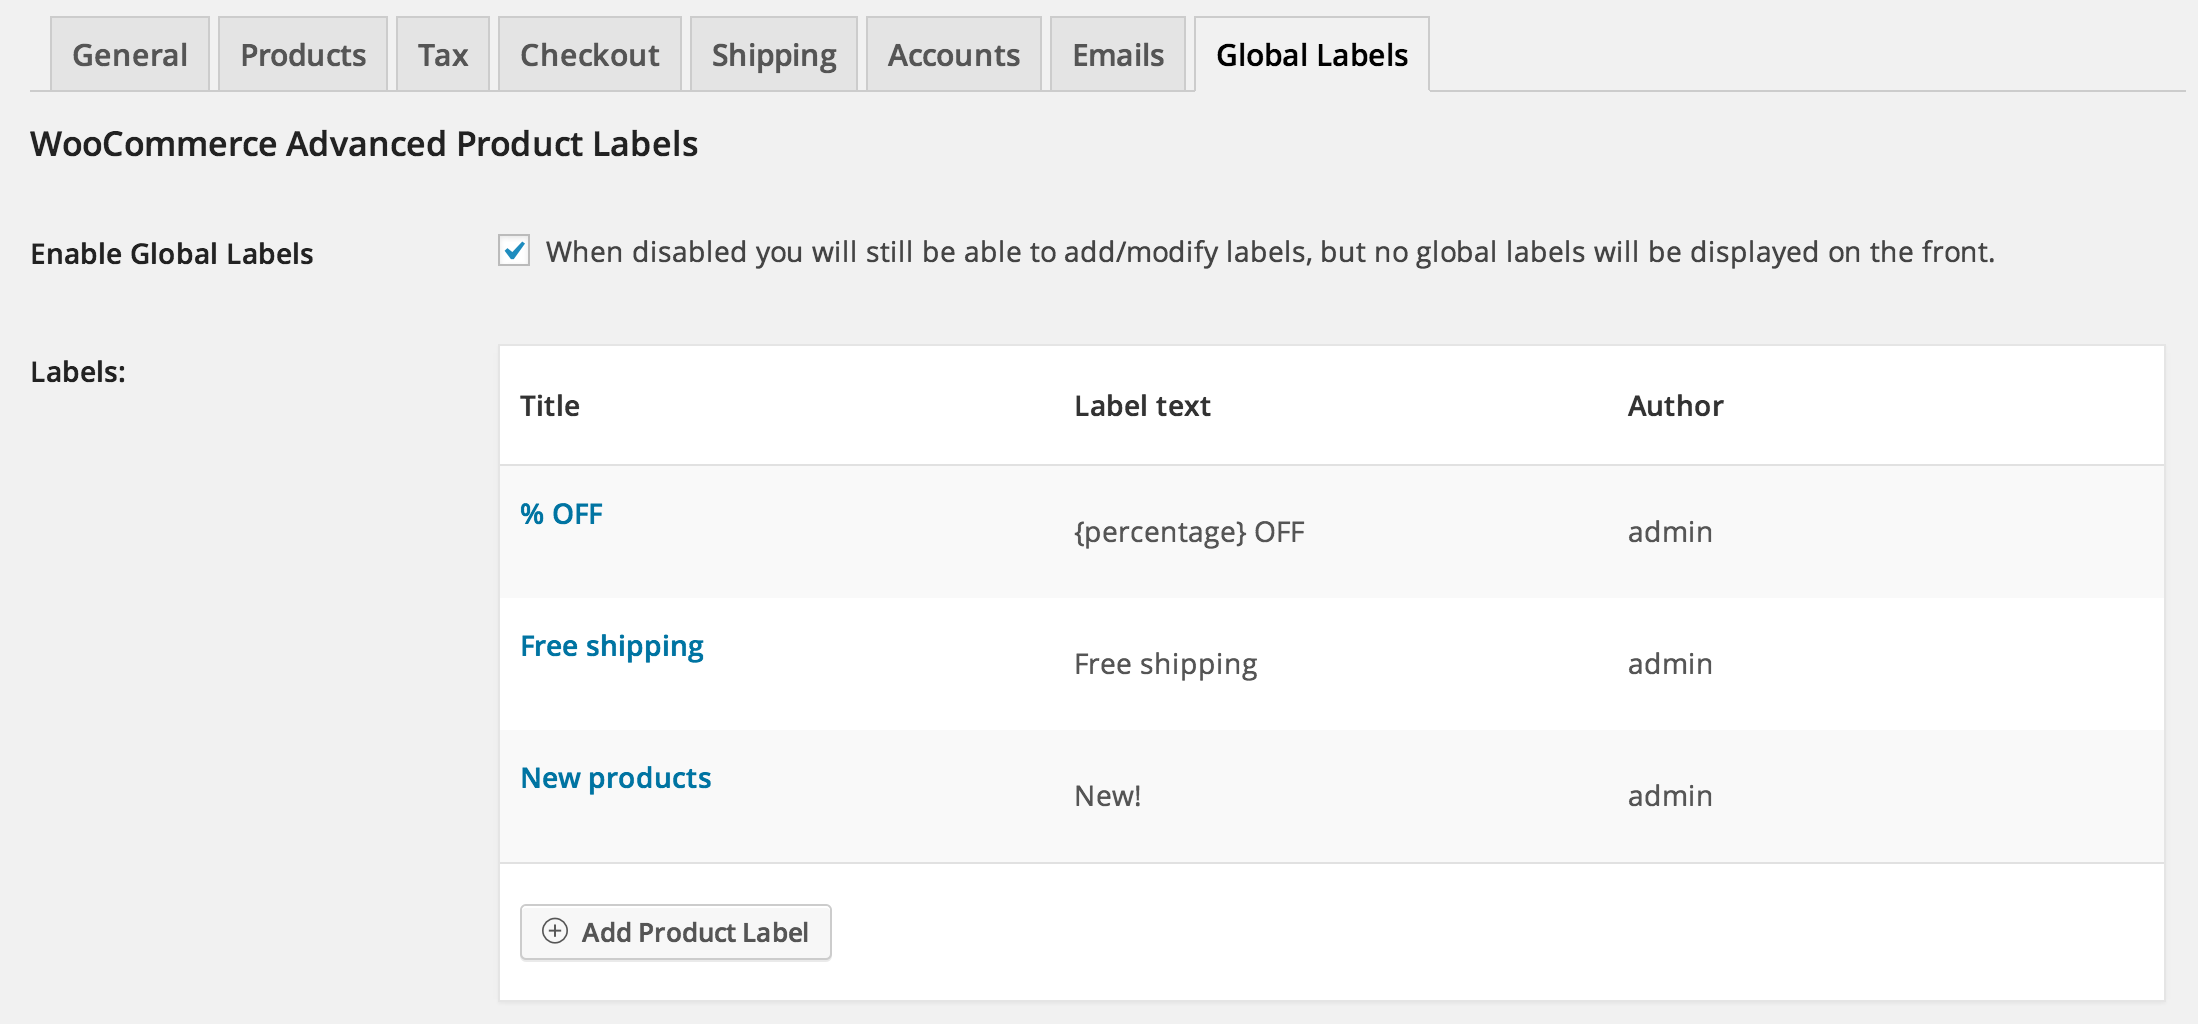 Image 2014 12 30 at 1.29.29 pm - WooCommerce Advanced Product Labels